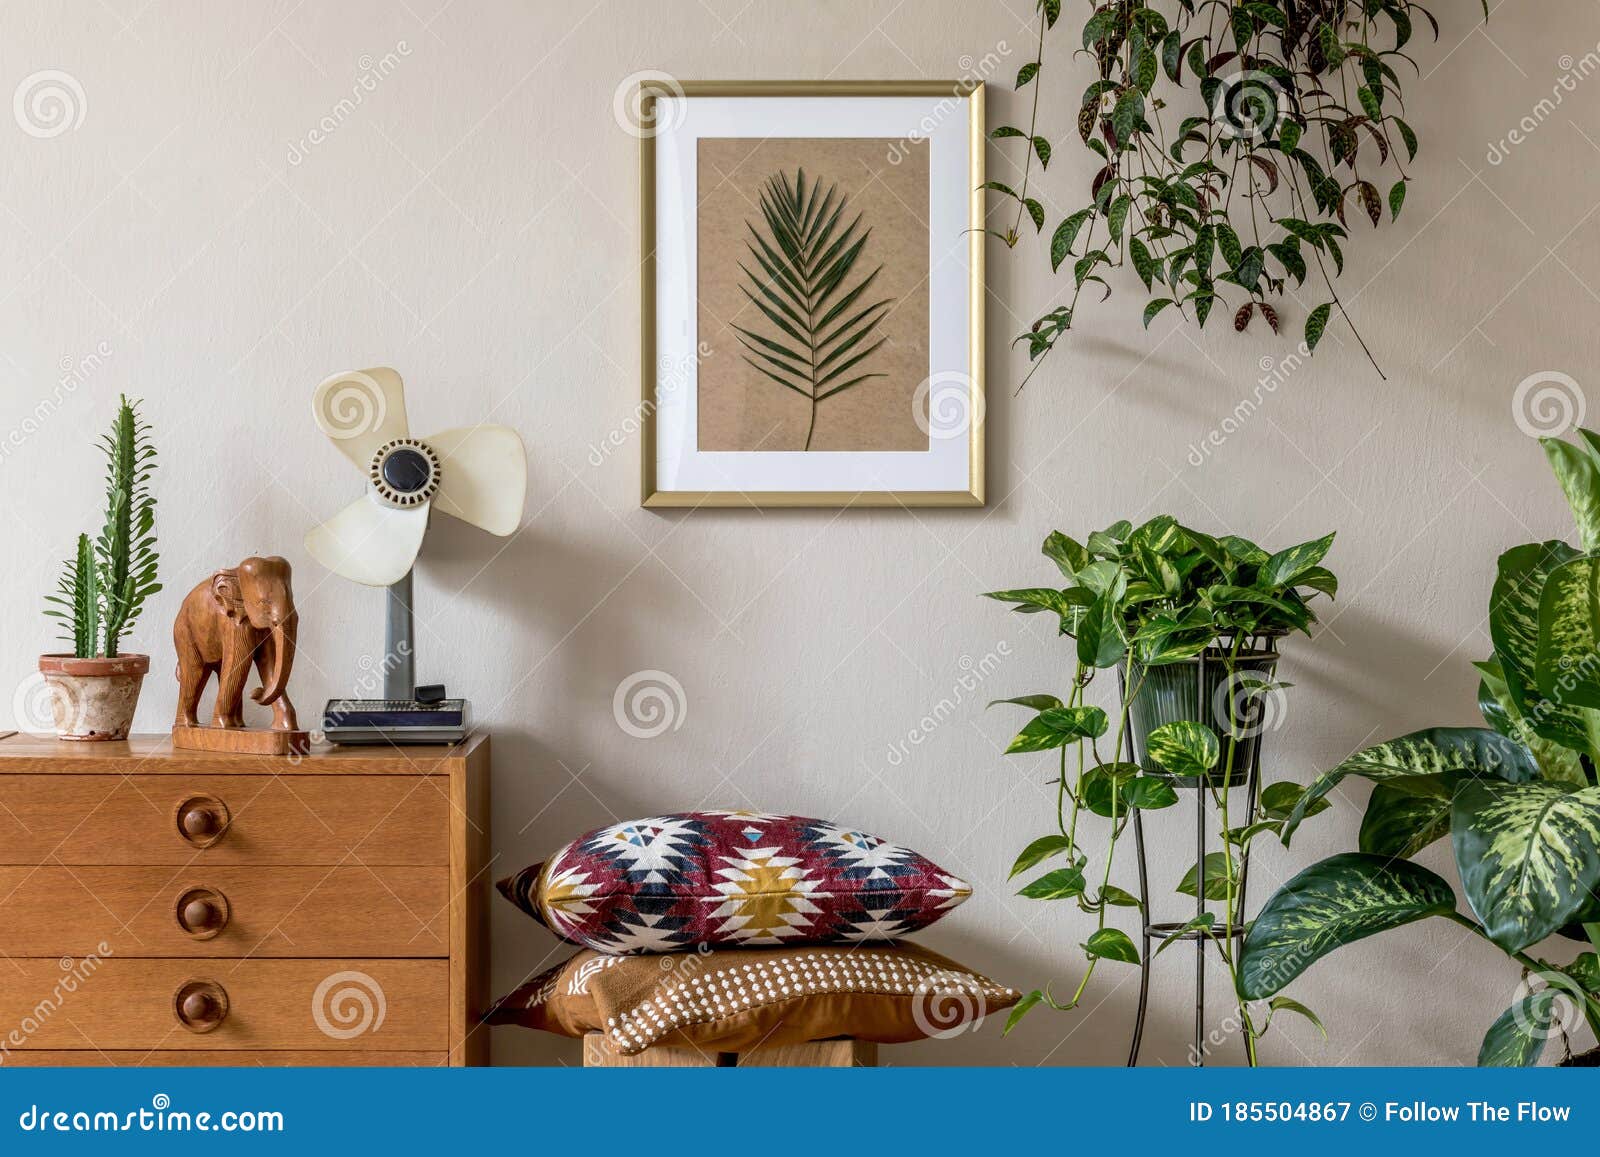 stylish retro home staging of living room with gold mock up poster frame.